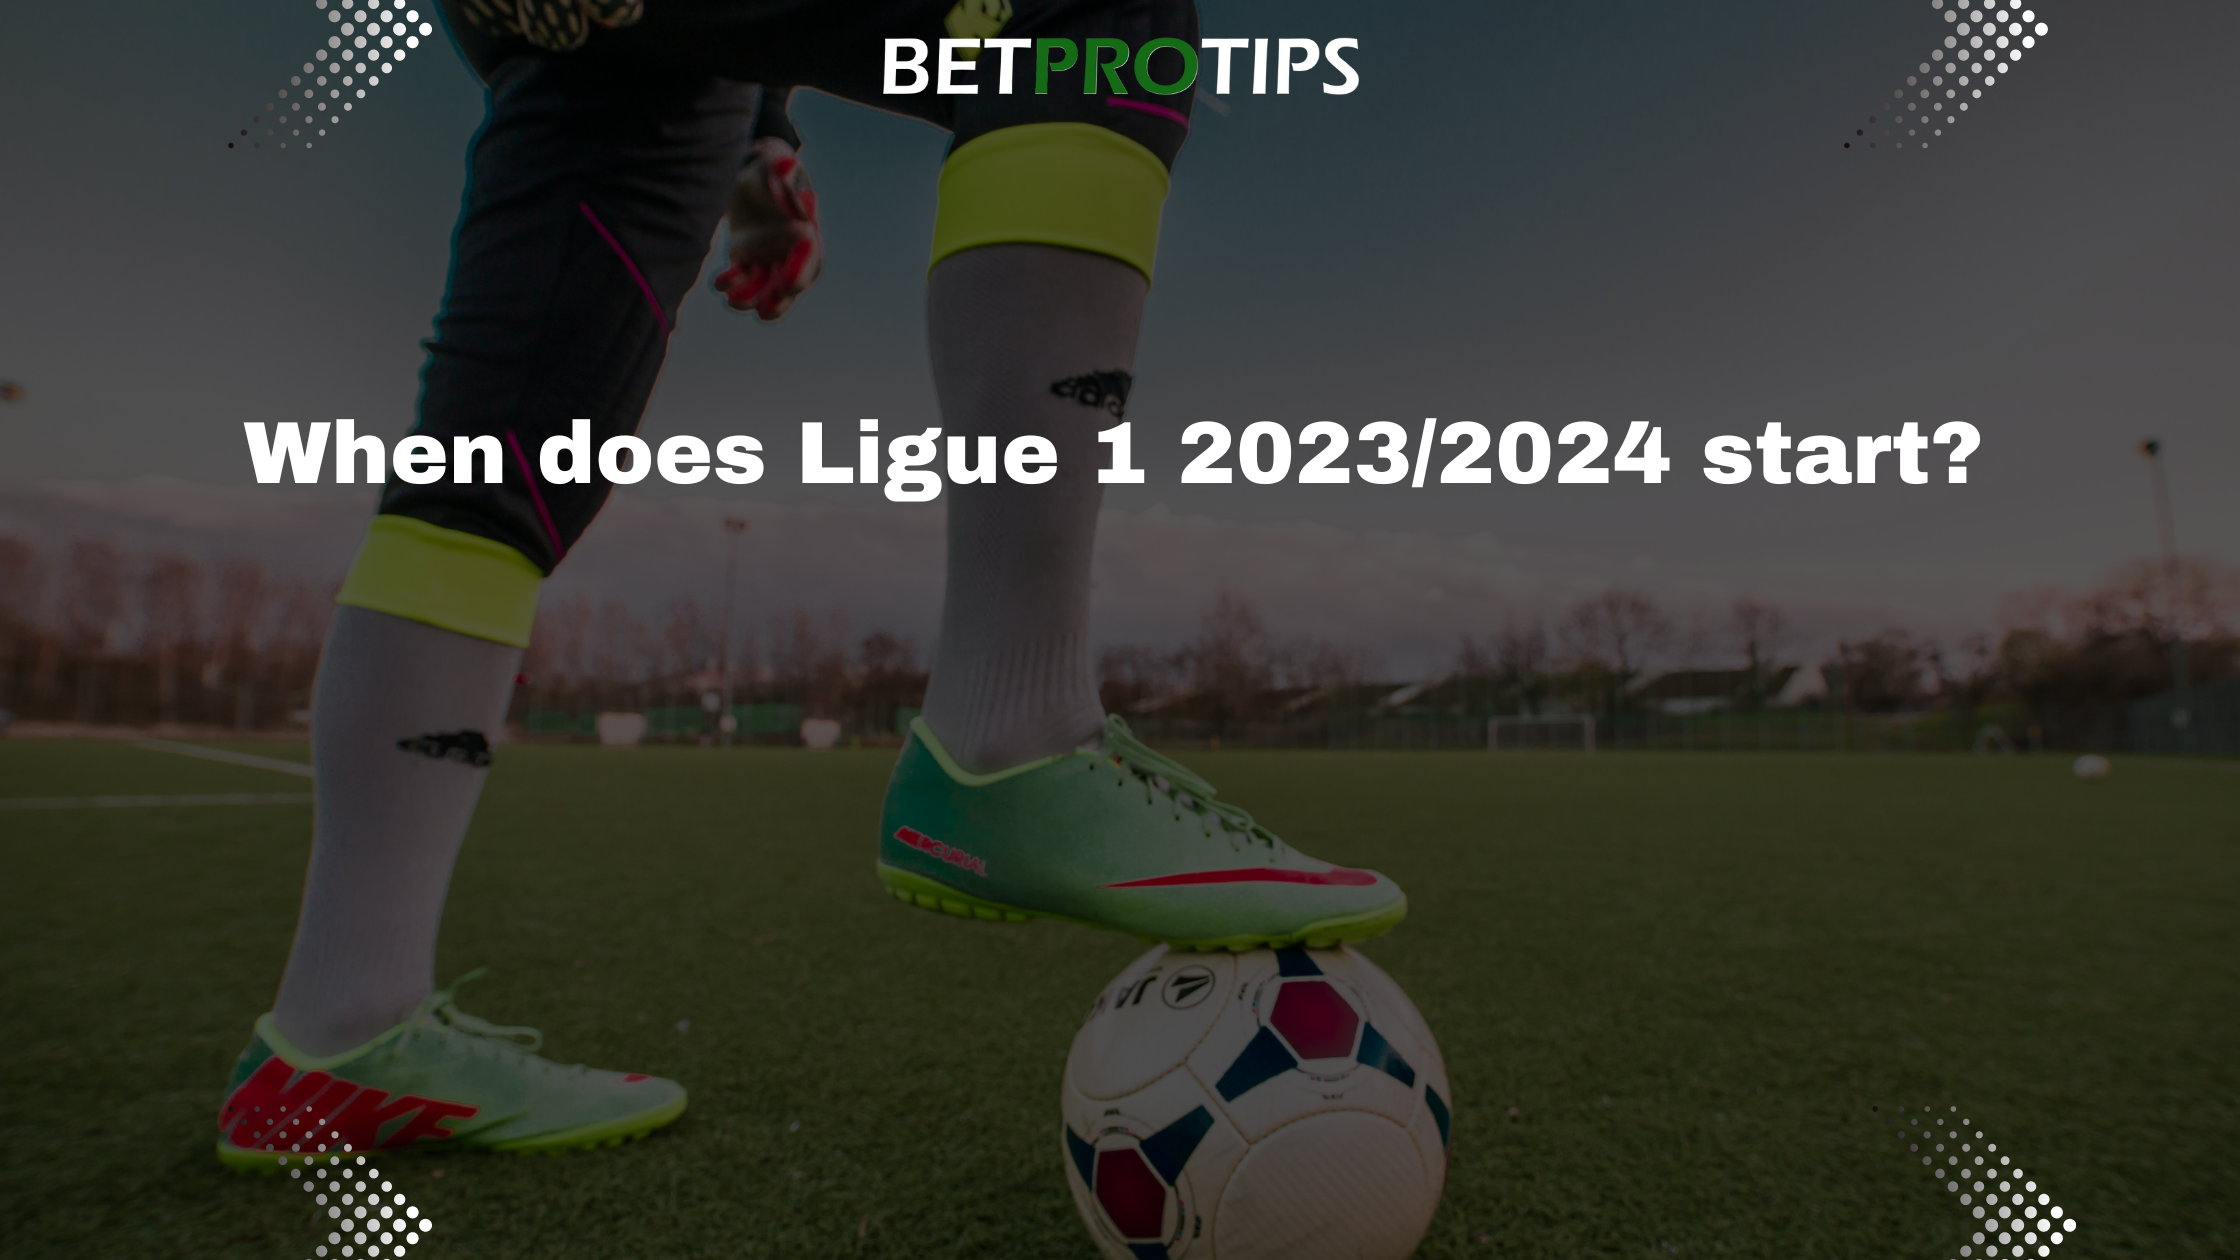 When Does French Ligue 1 Season 2023/2024 Start? Free Betting Tips